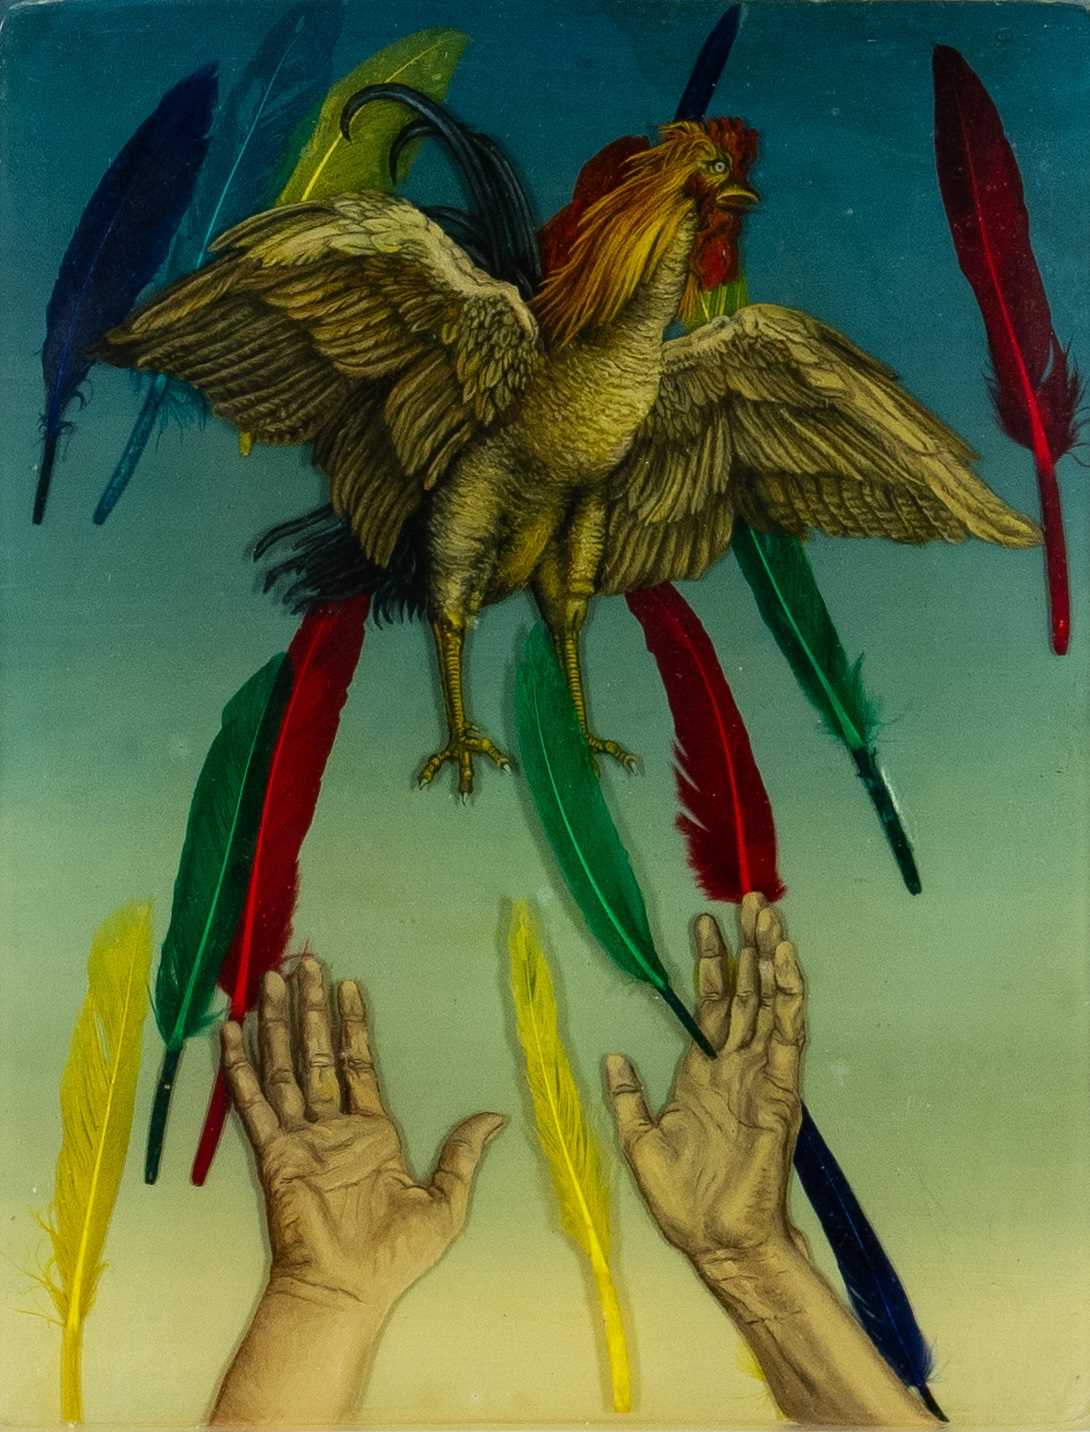 ‡ ALAN SALISBURY (b.1946) mixed media and oil on glass panel - entitled verso, 'Durer's Cock' on